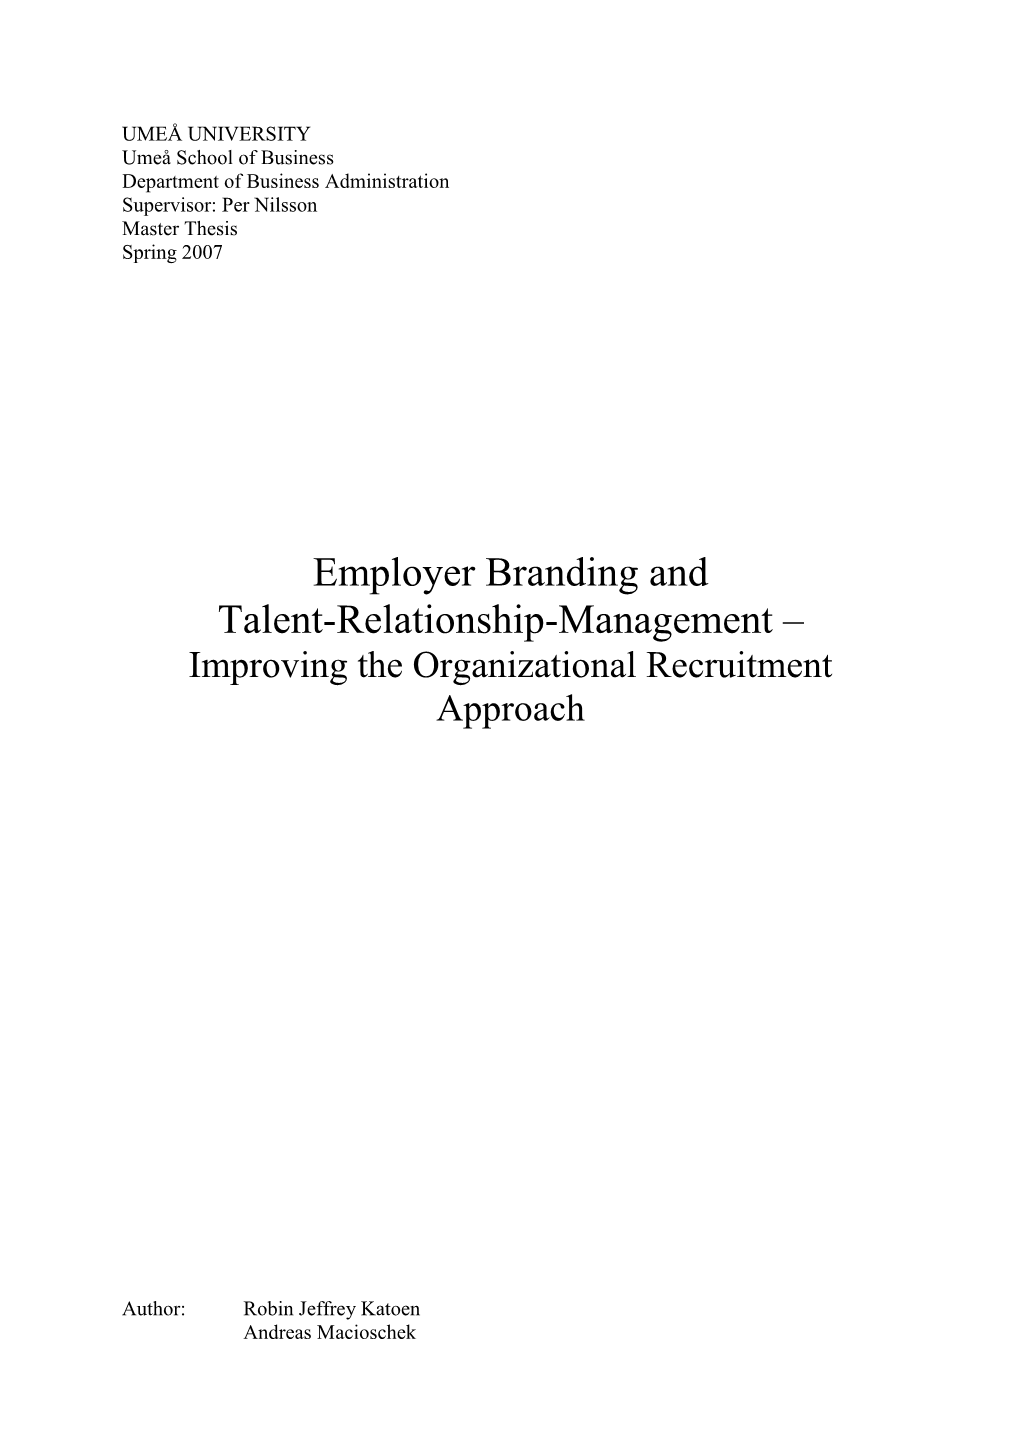 Employer Branding and Talent-Relationship-Management – Improving the Organizational Recruitment Approach